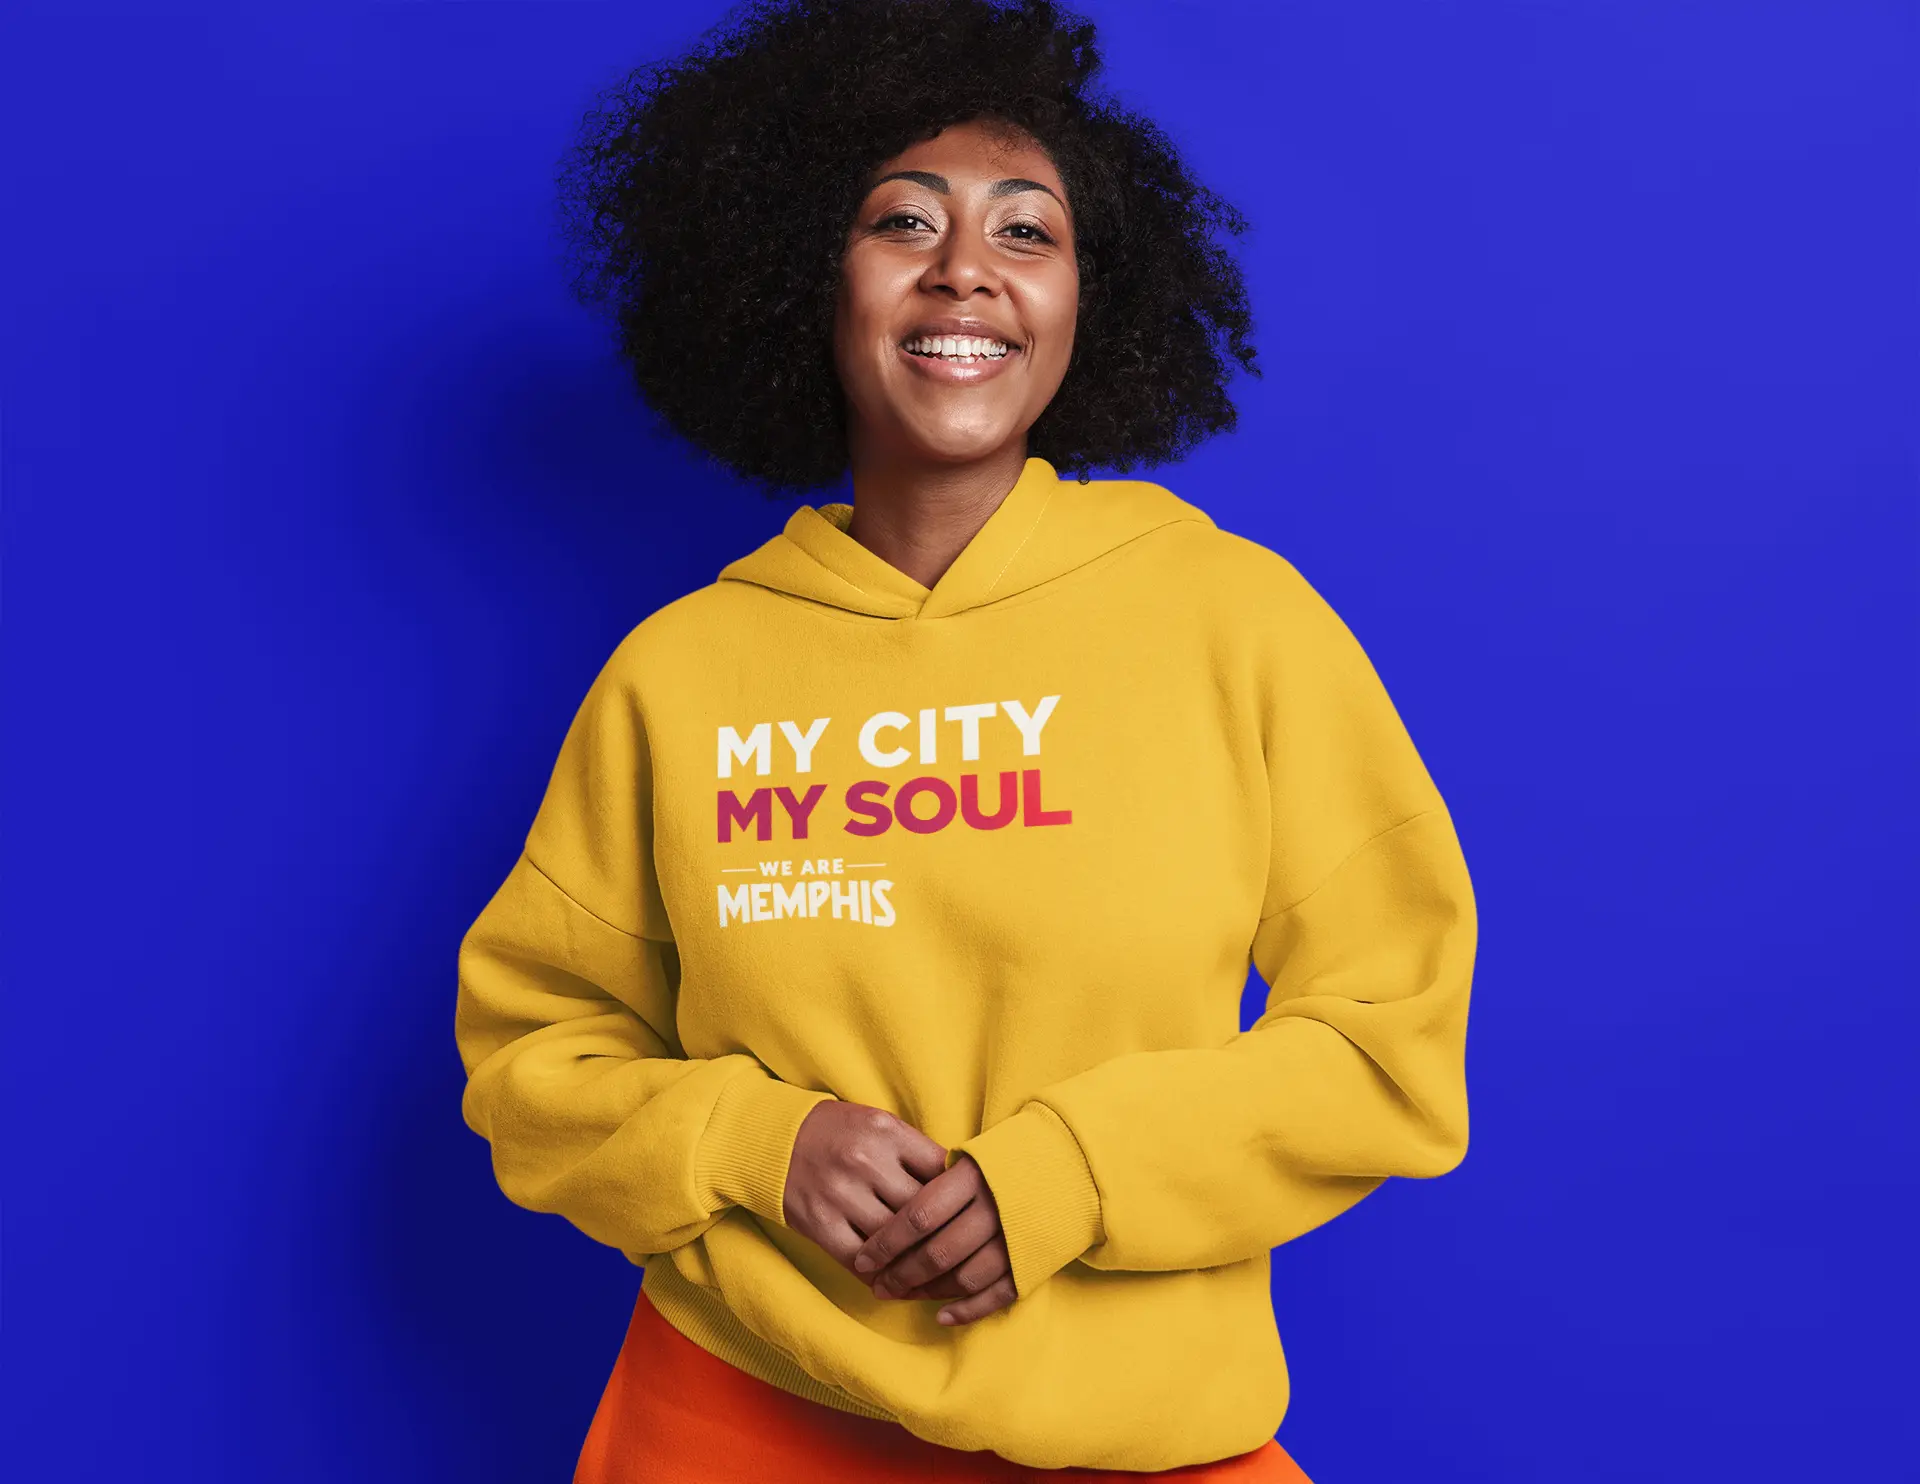 A Memphis resident wearing the "My City My Soul" yellow hooded sweater